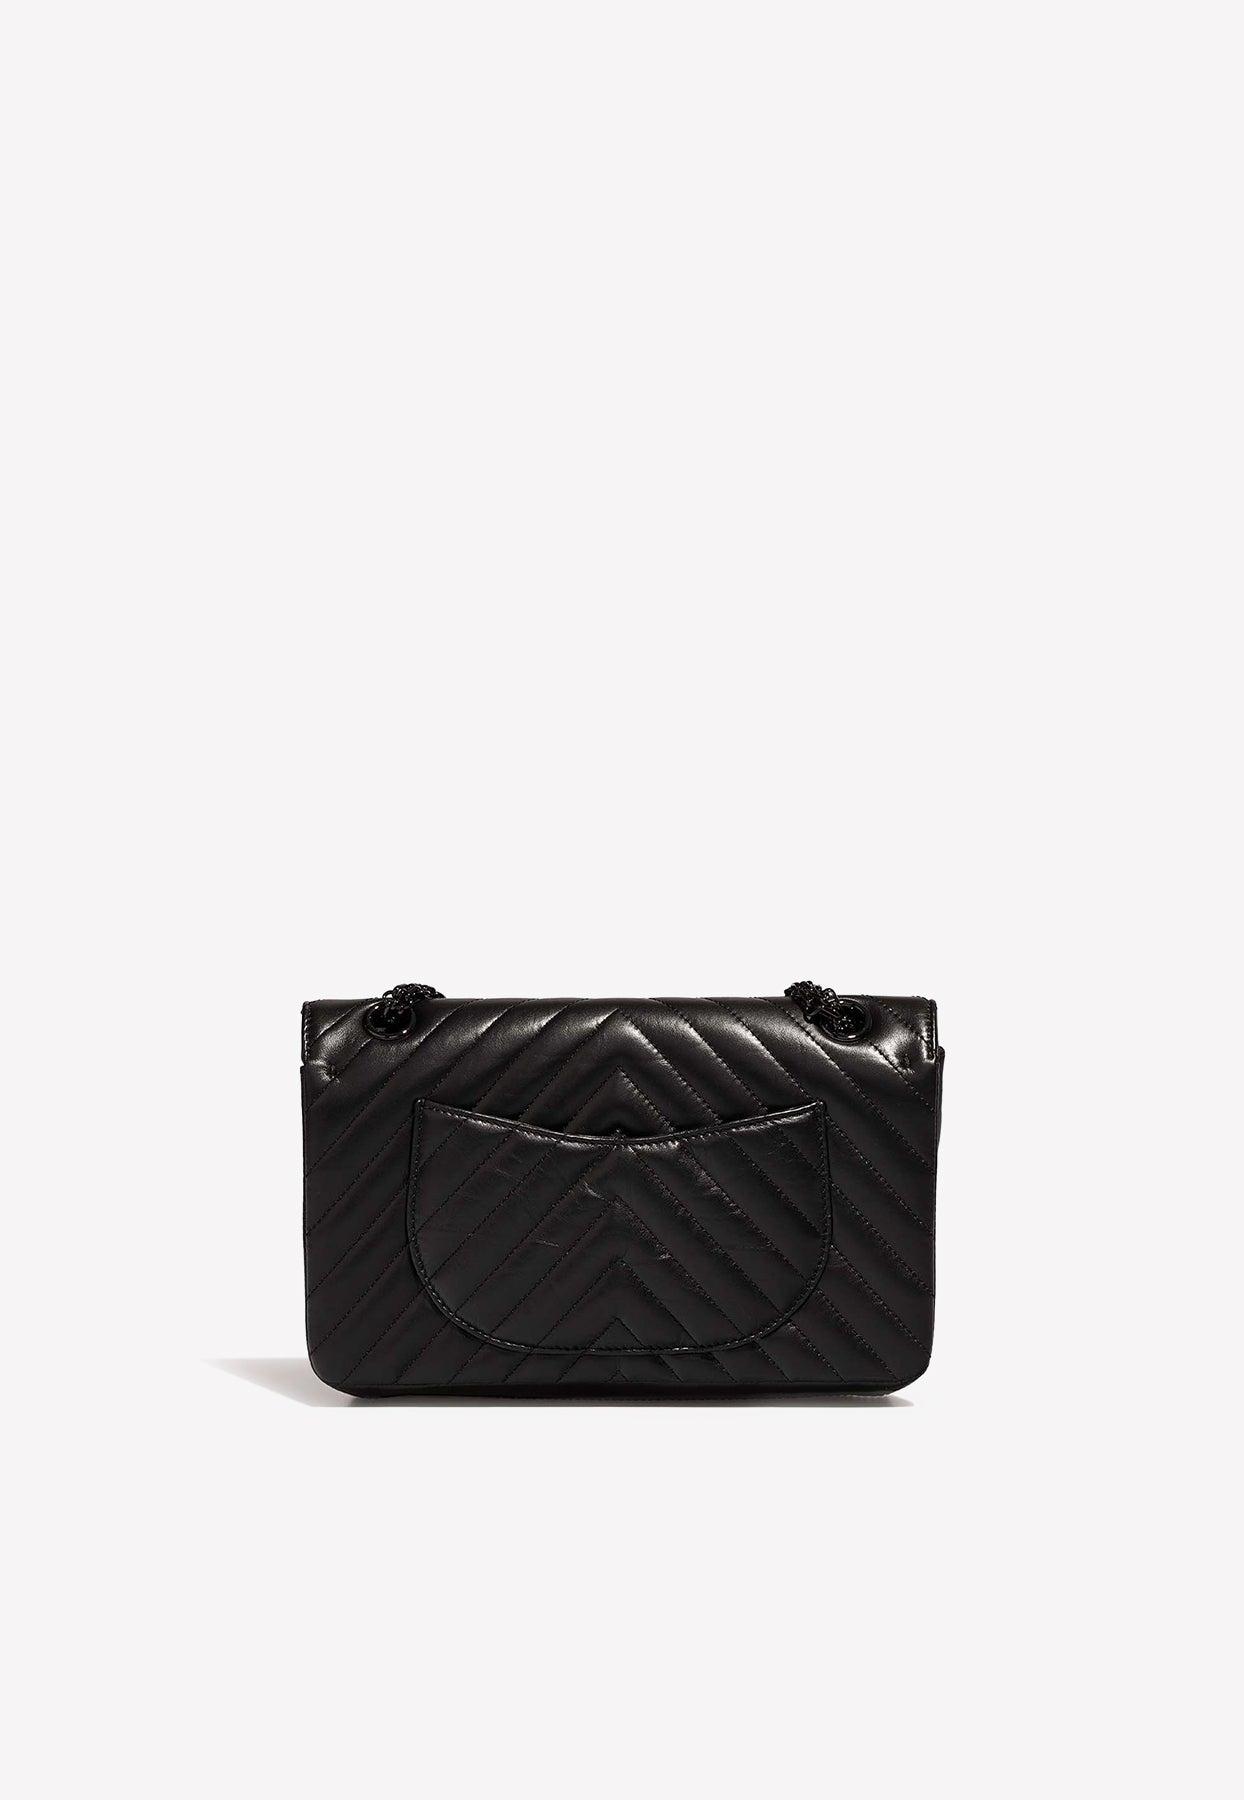 CHANEL CC Quilted Caviar Shoulder Bag in Black 2003 - 2004